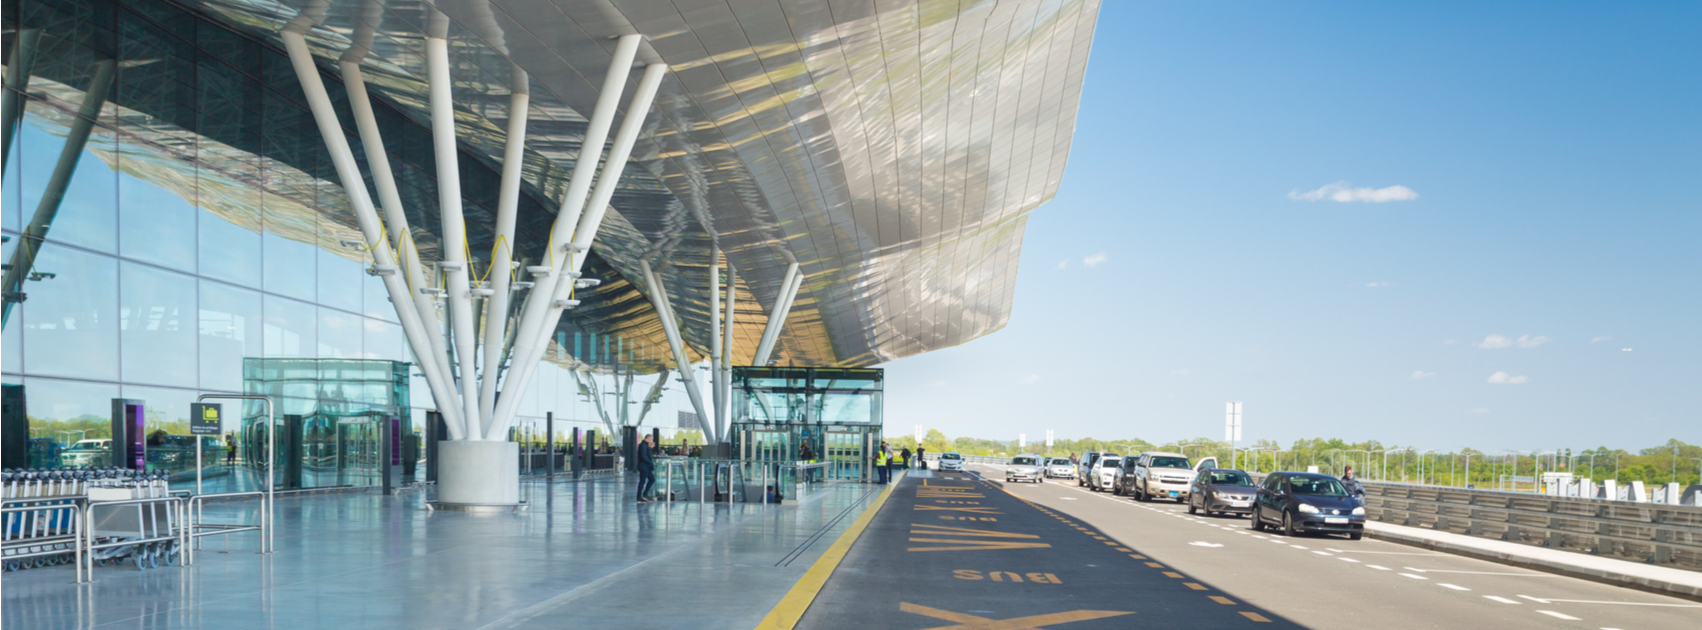 Zagreb Airport to Expand and Add “Airport City”